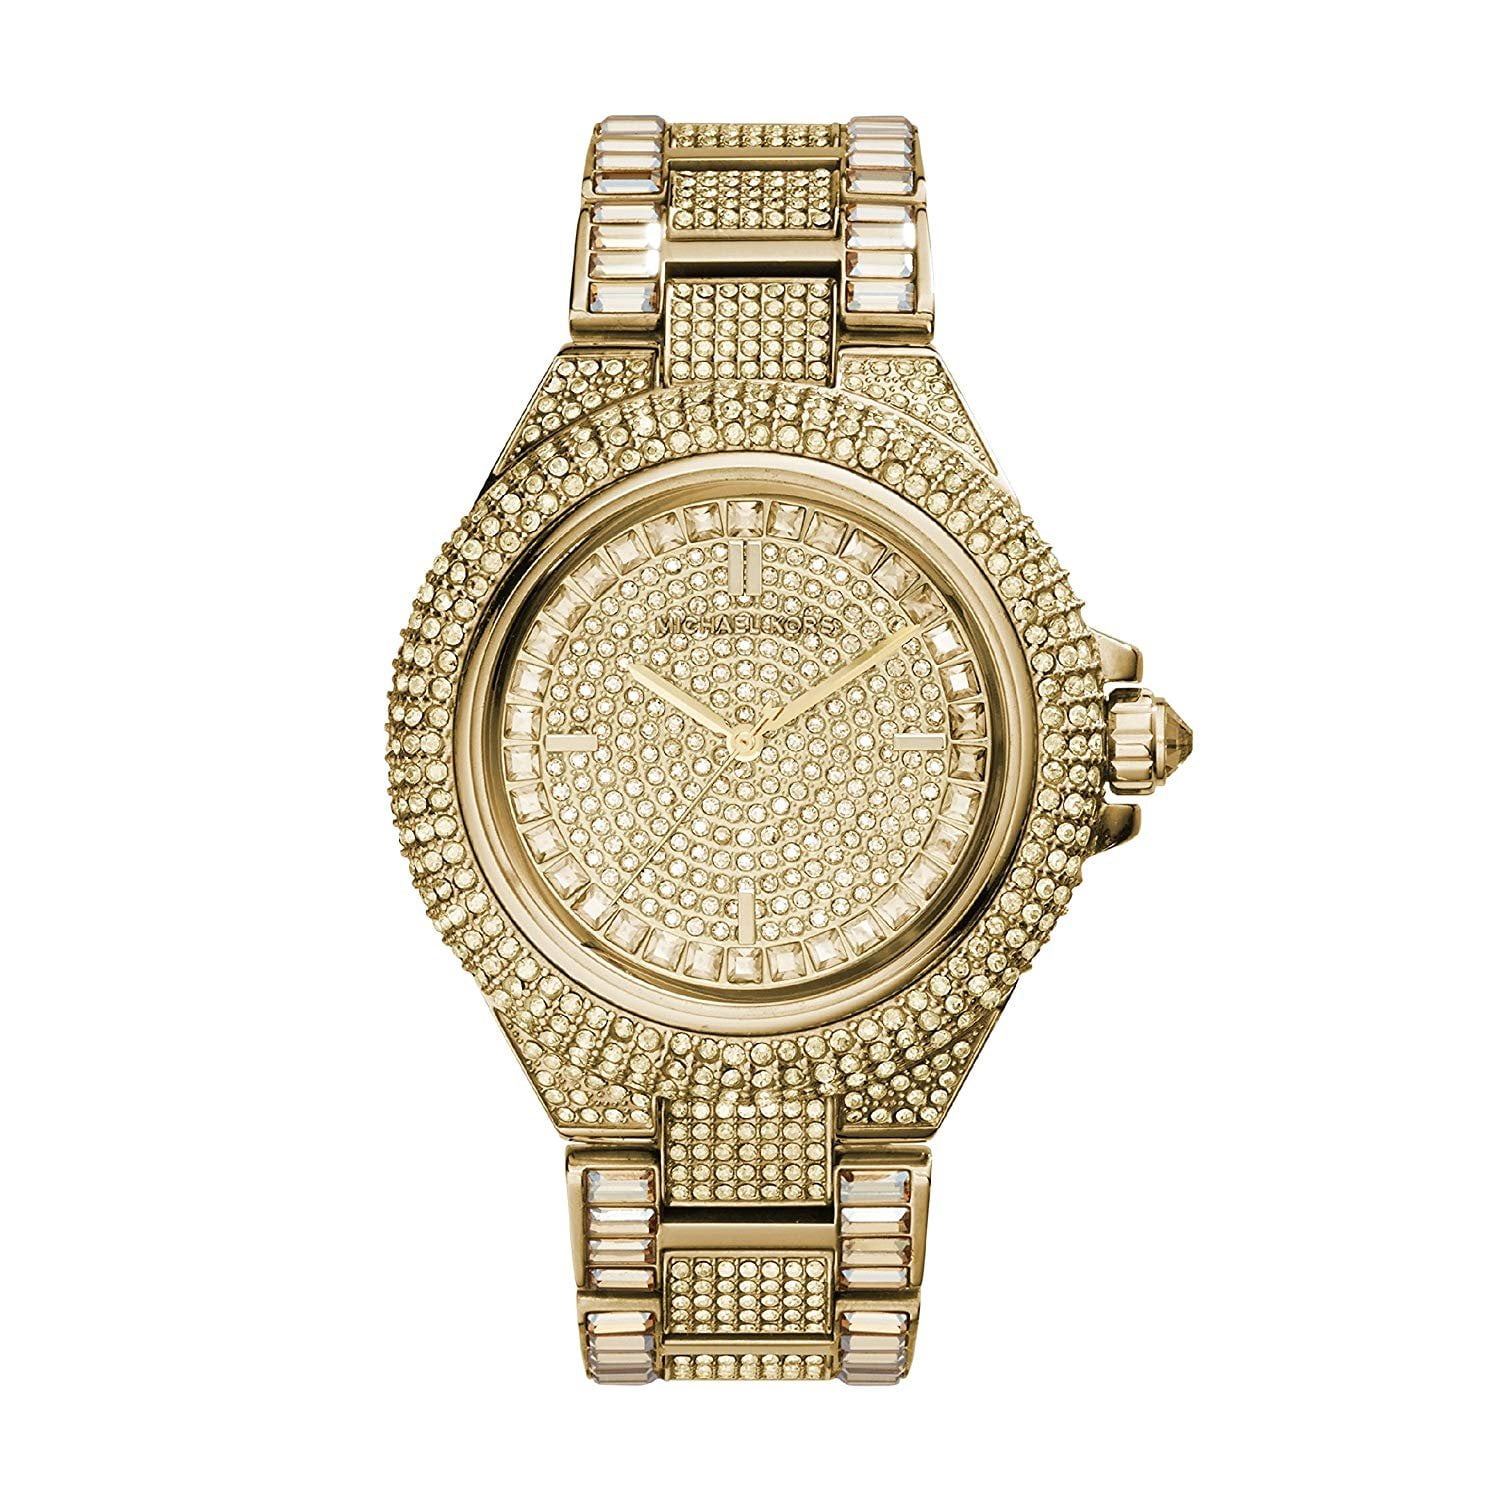 Nonsens Sightseeing disk Michael Kors Women's Camille Crystal Gold-Tone Stainless Steel Watch MK5720  - Walmart.com